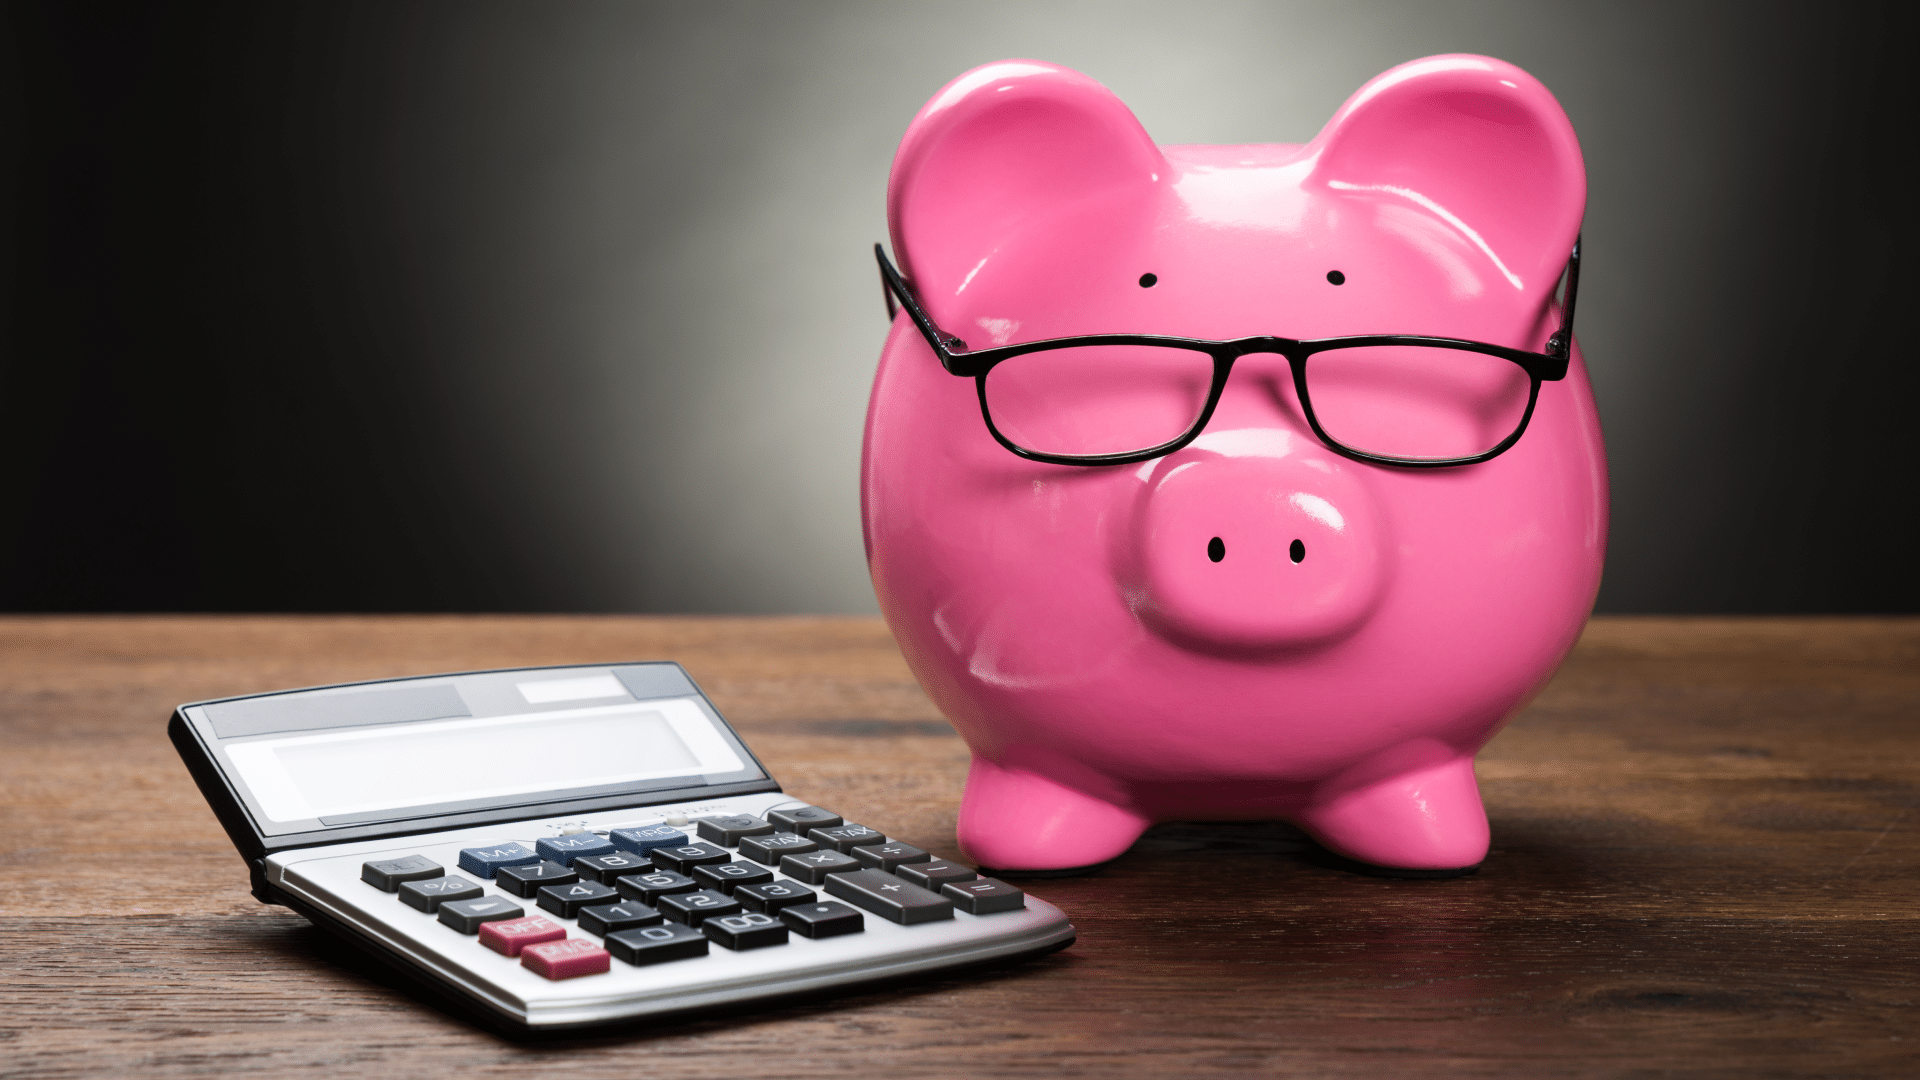 blog marketing - a piggy bank wearing glasses sits next to a calculator